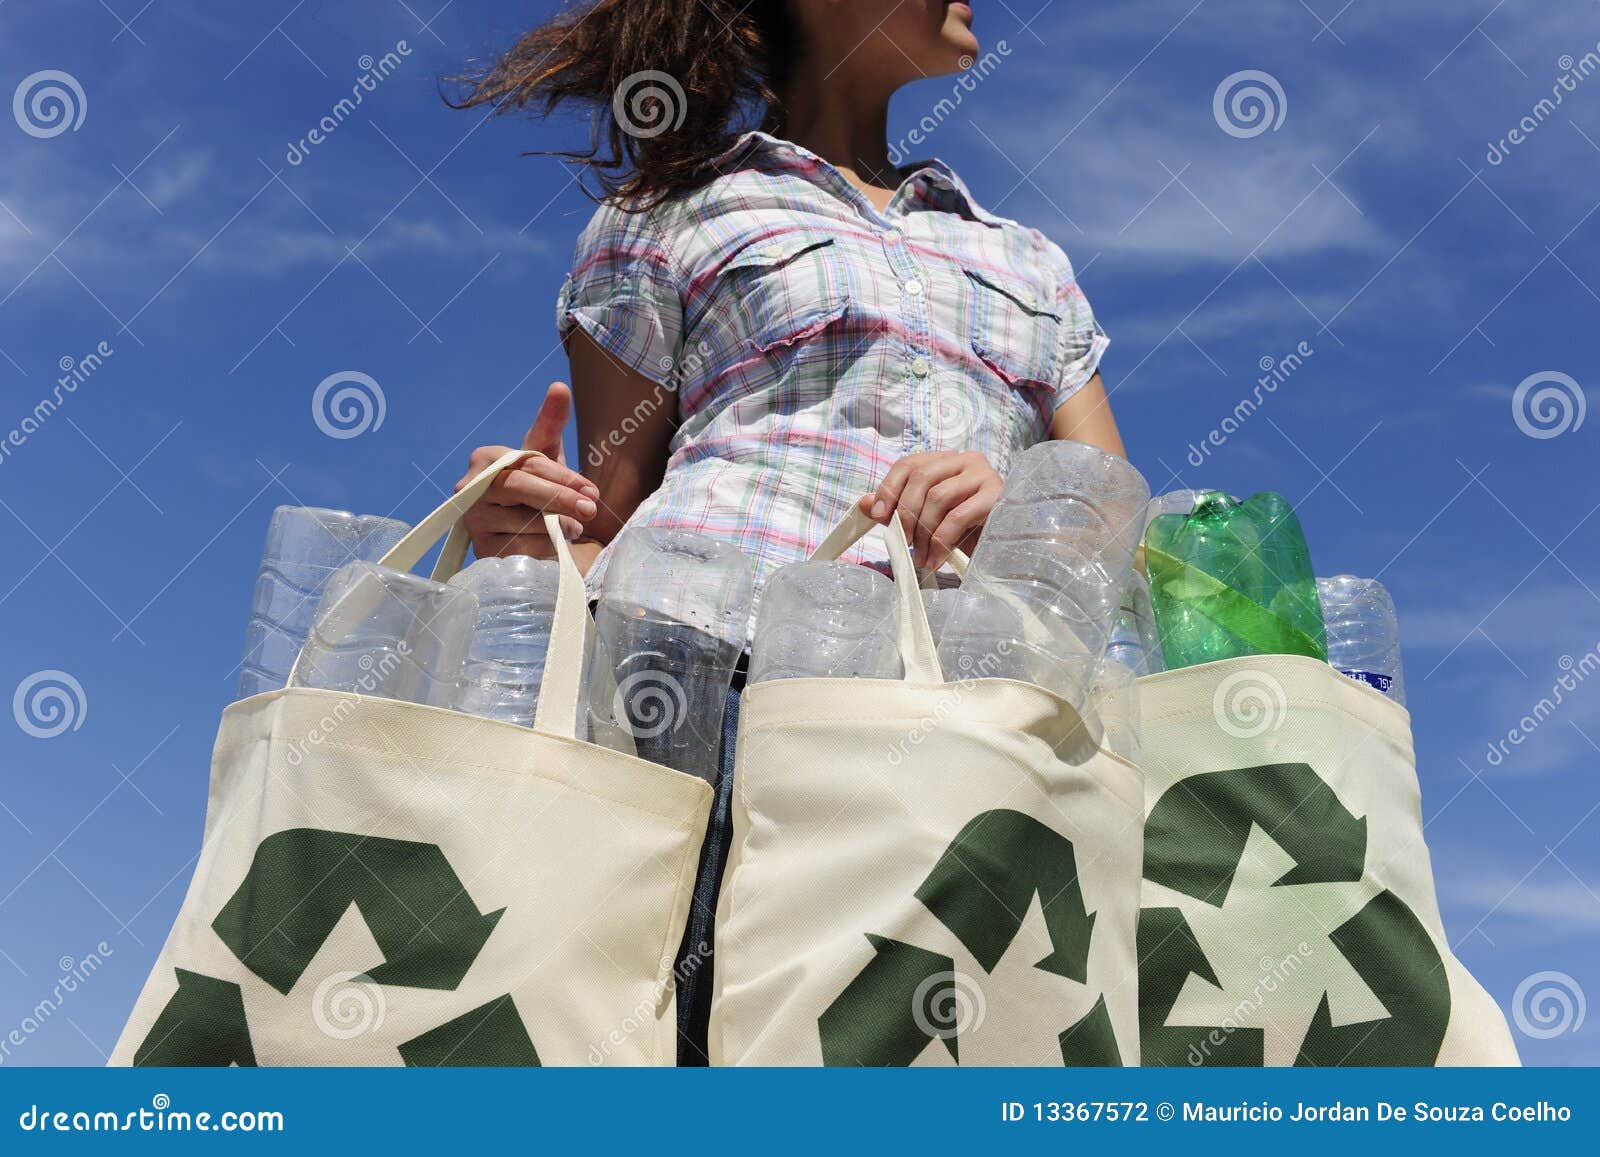 recycling: woman holding bag